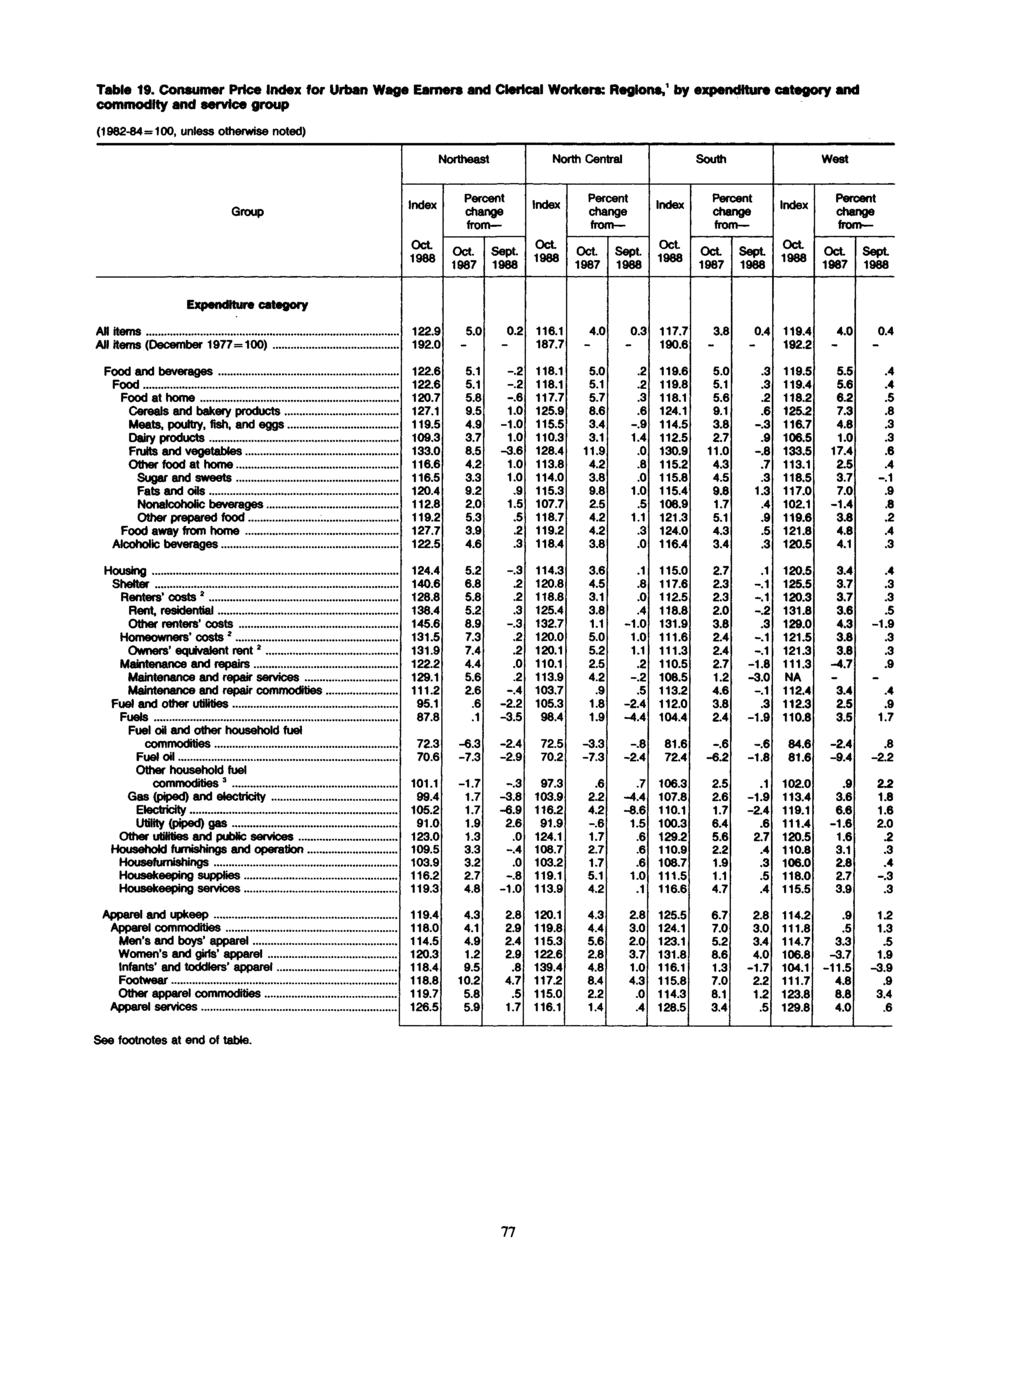 Table 19. Consumer Price for Urban Wage Earners and Clerical Workers: Regions, 1 by expenditure category and commodity and service group Northeast North Central South West Group.